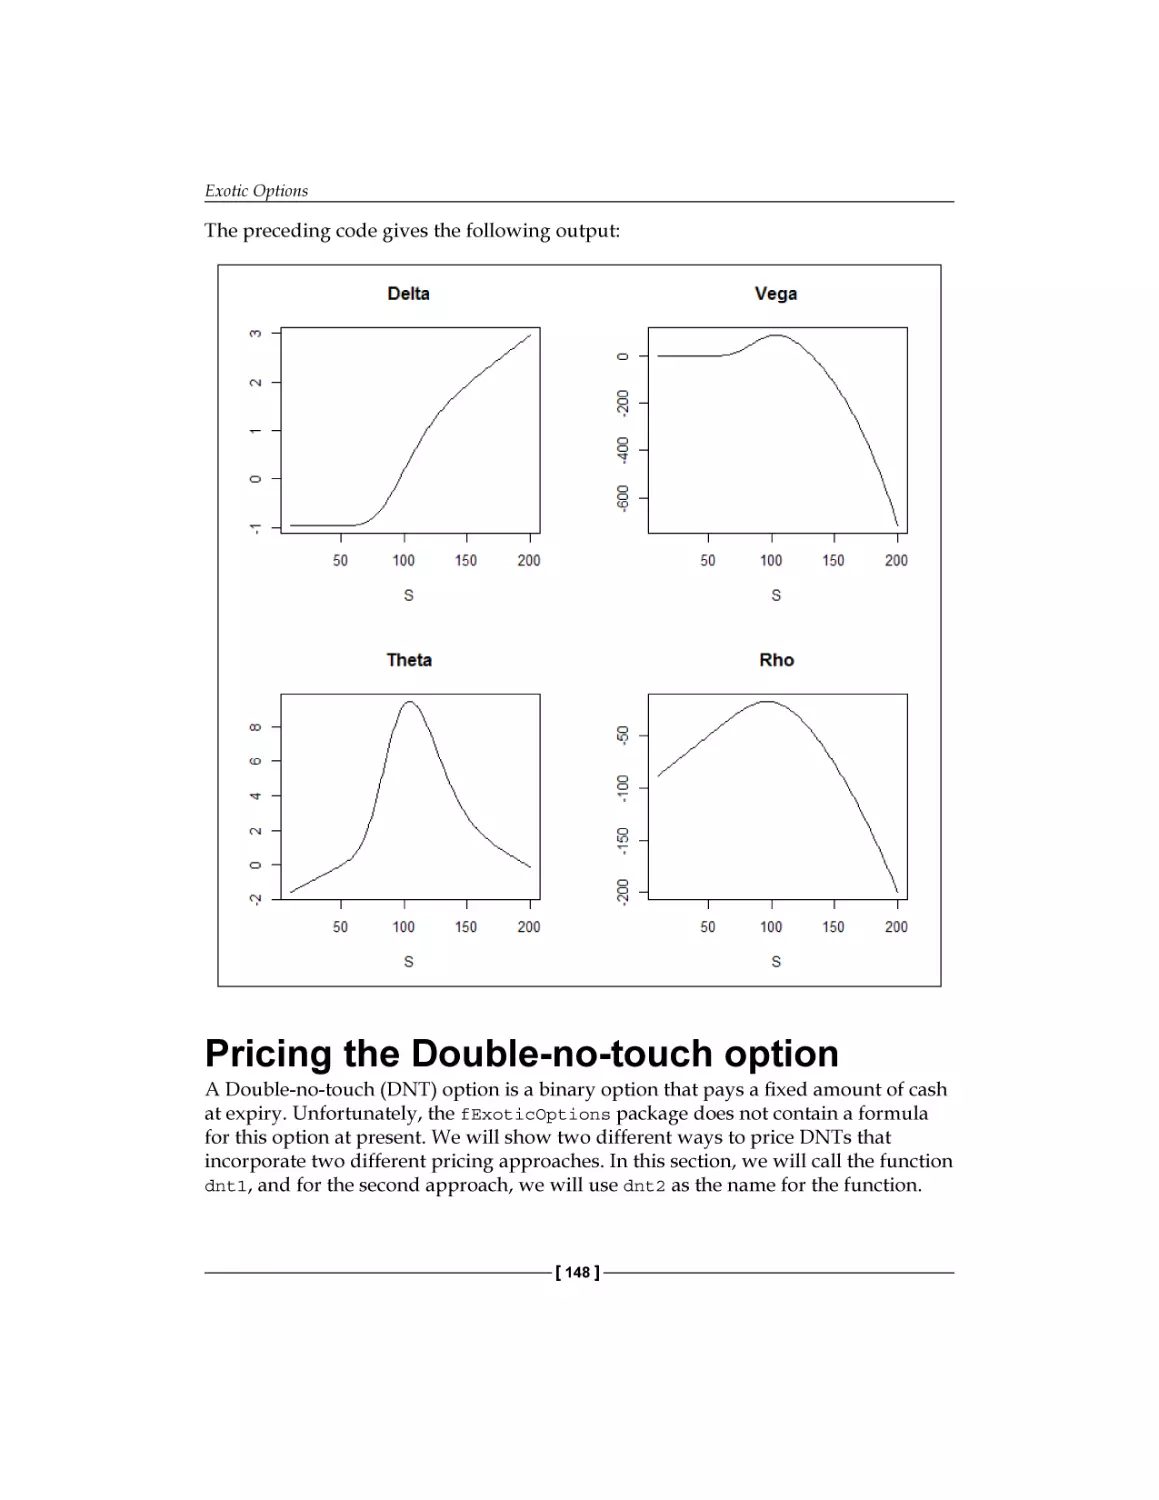 Pricing the Double-no-touch option